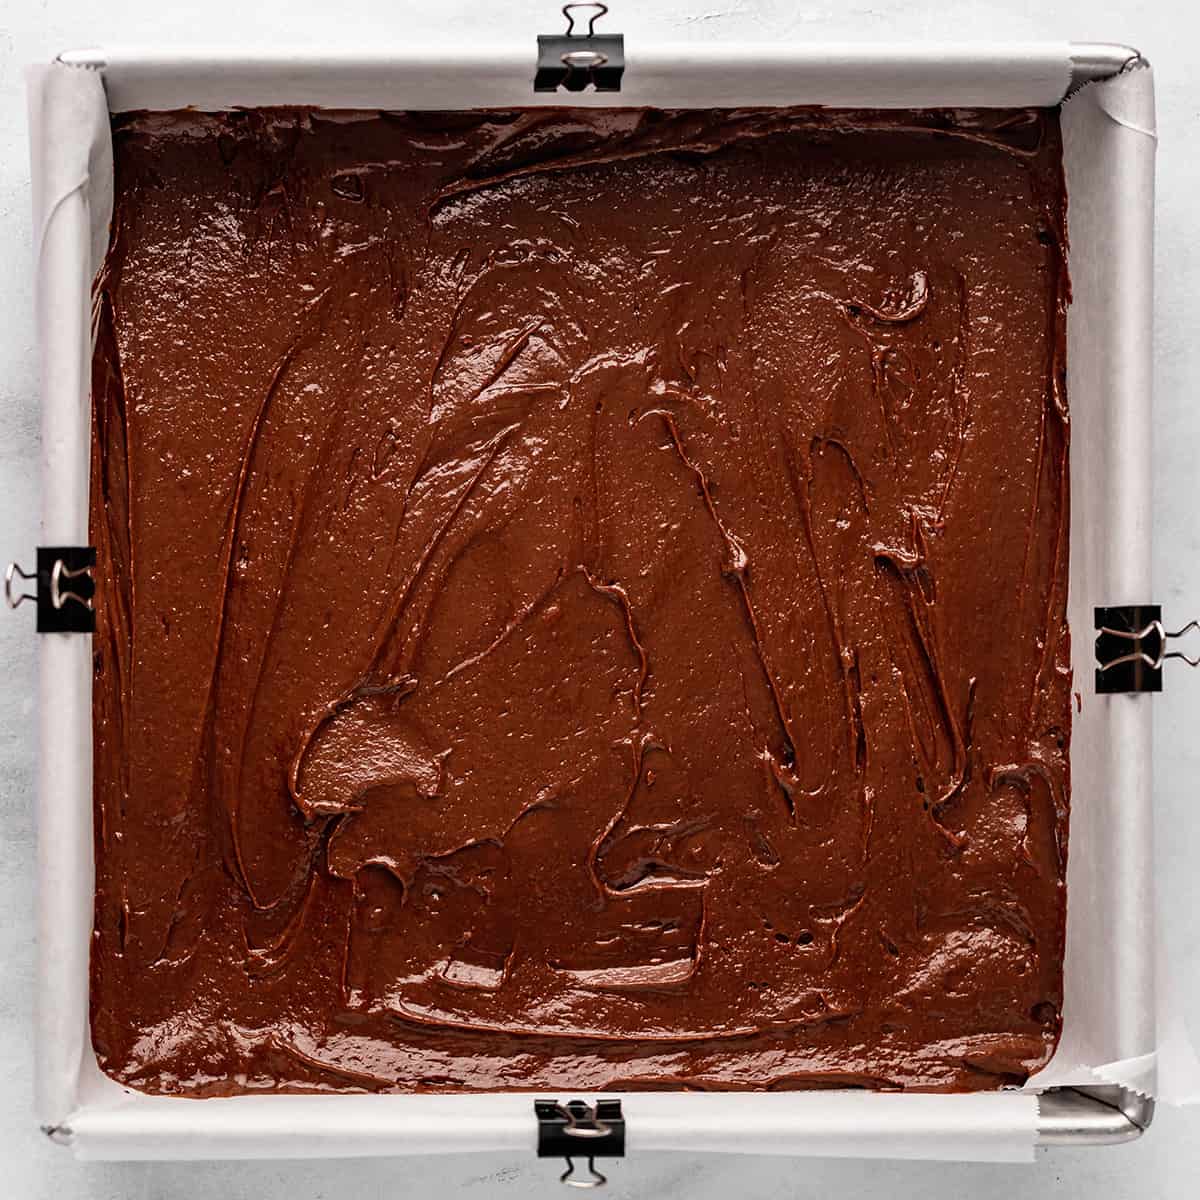 Nutella Brownies in a baking dish before baking